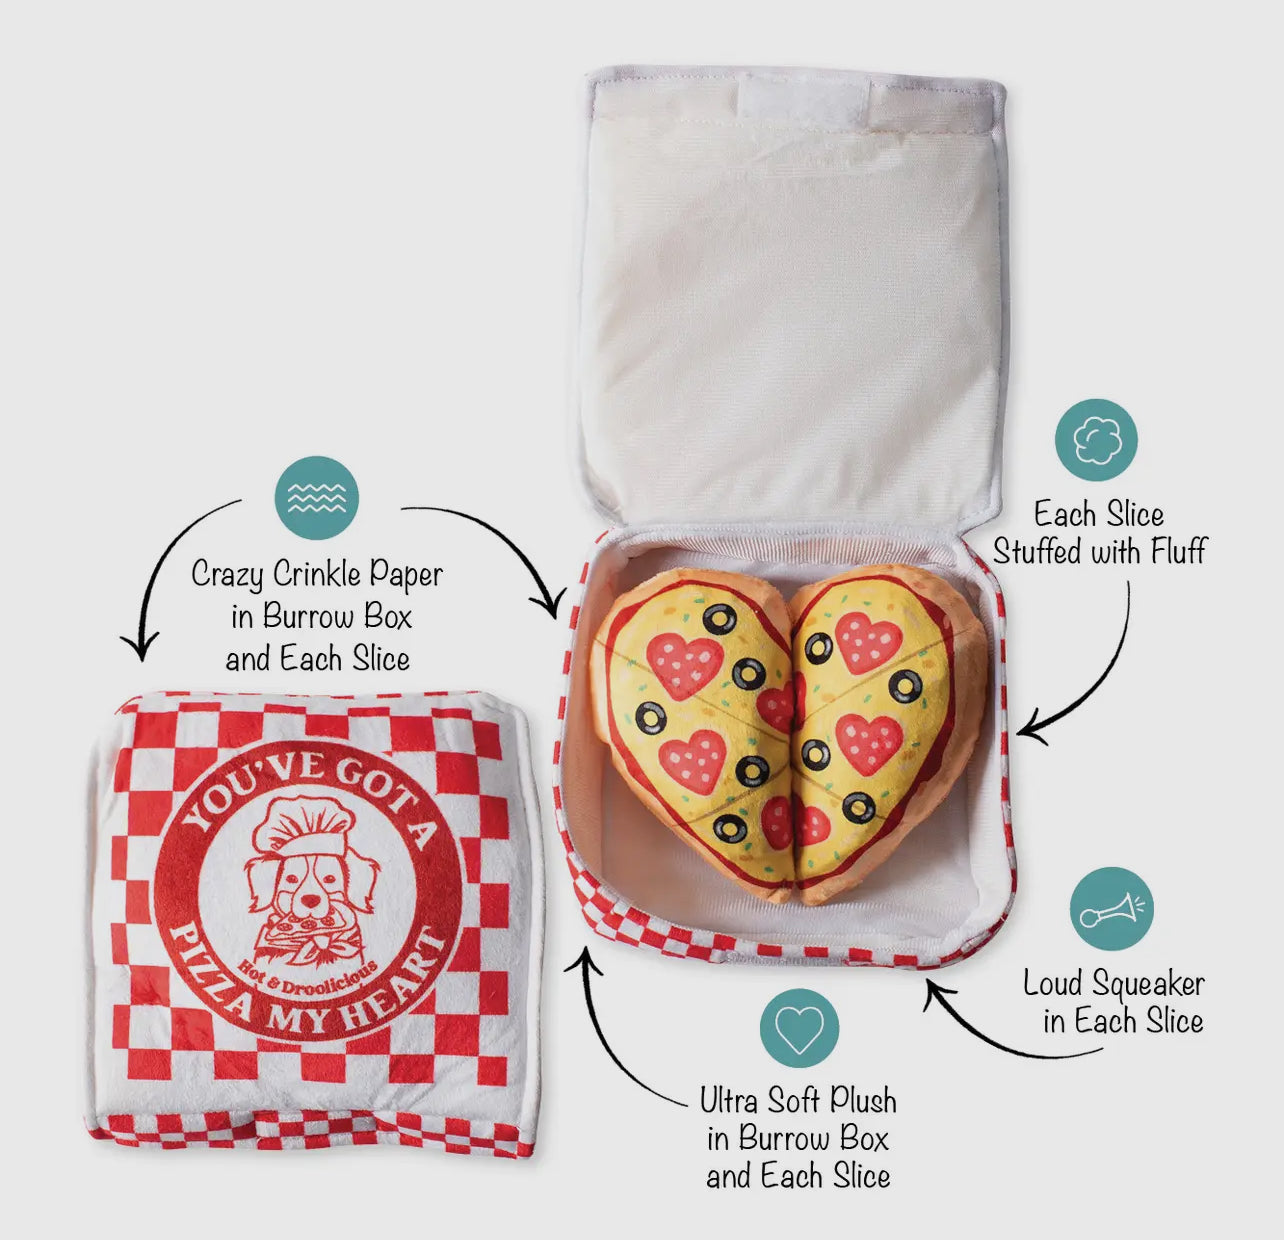 Pizza My Heart Dog Toy